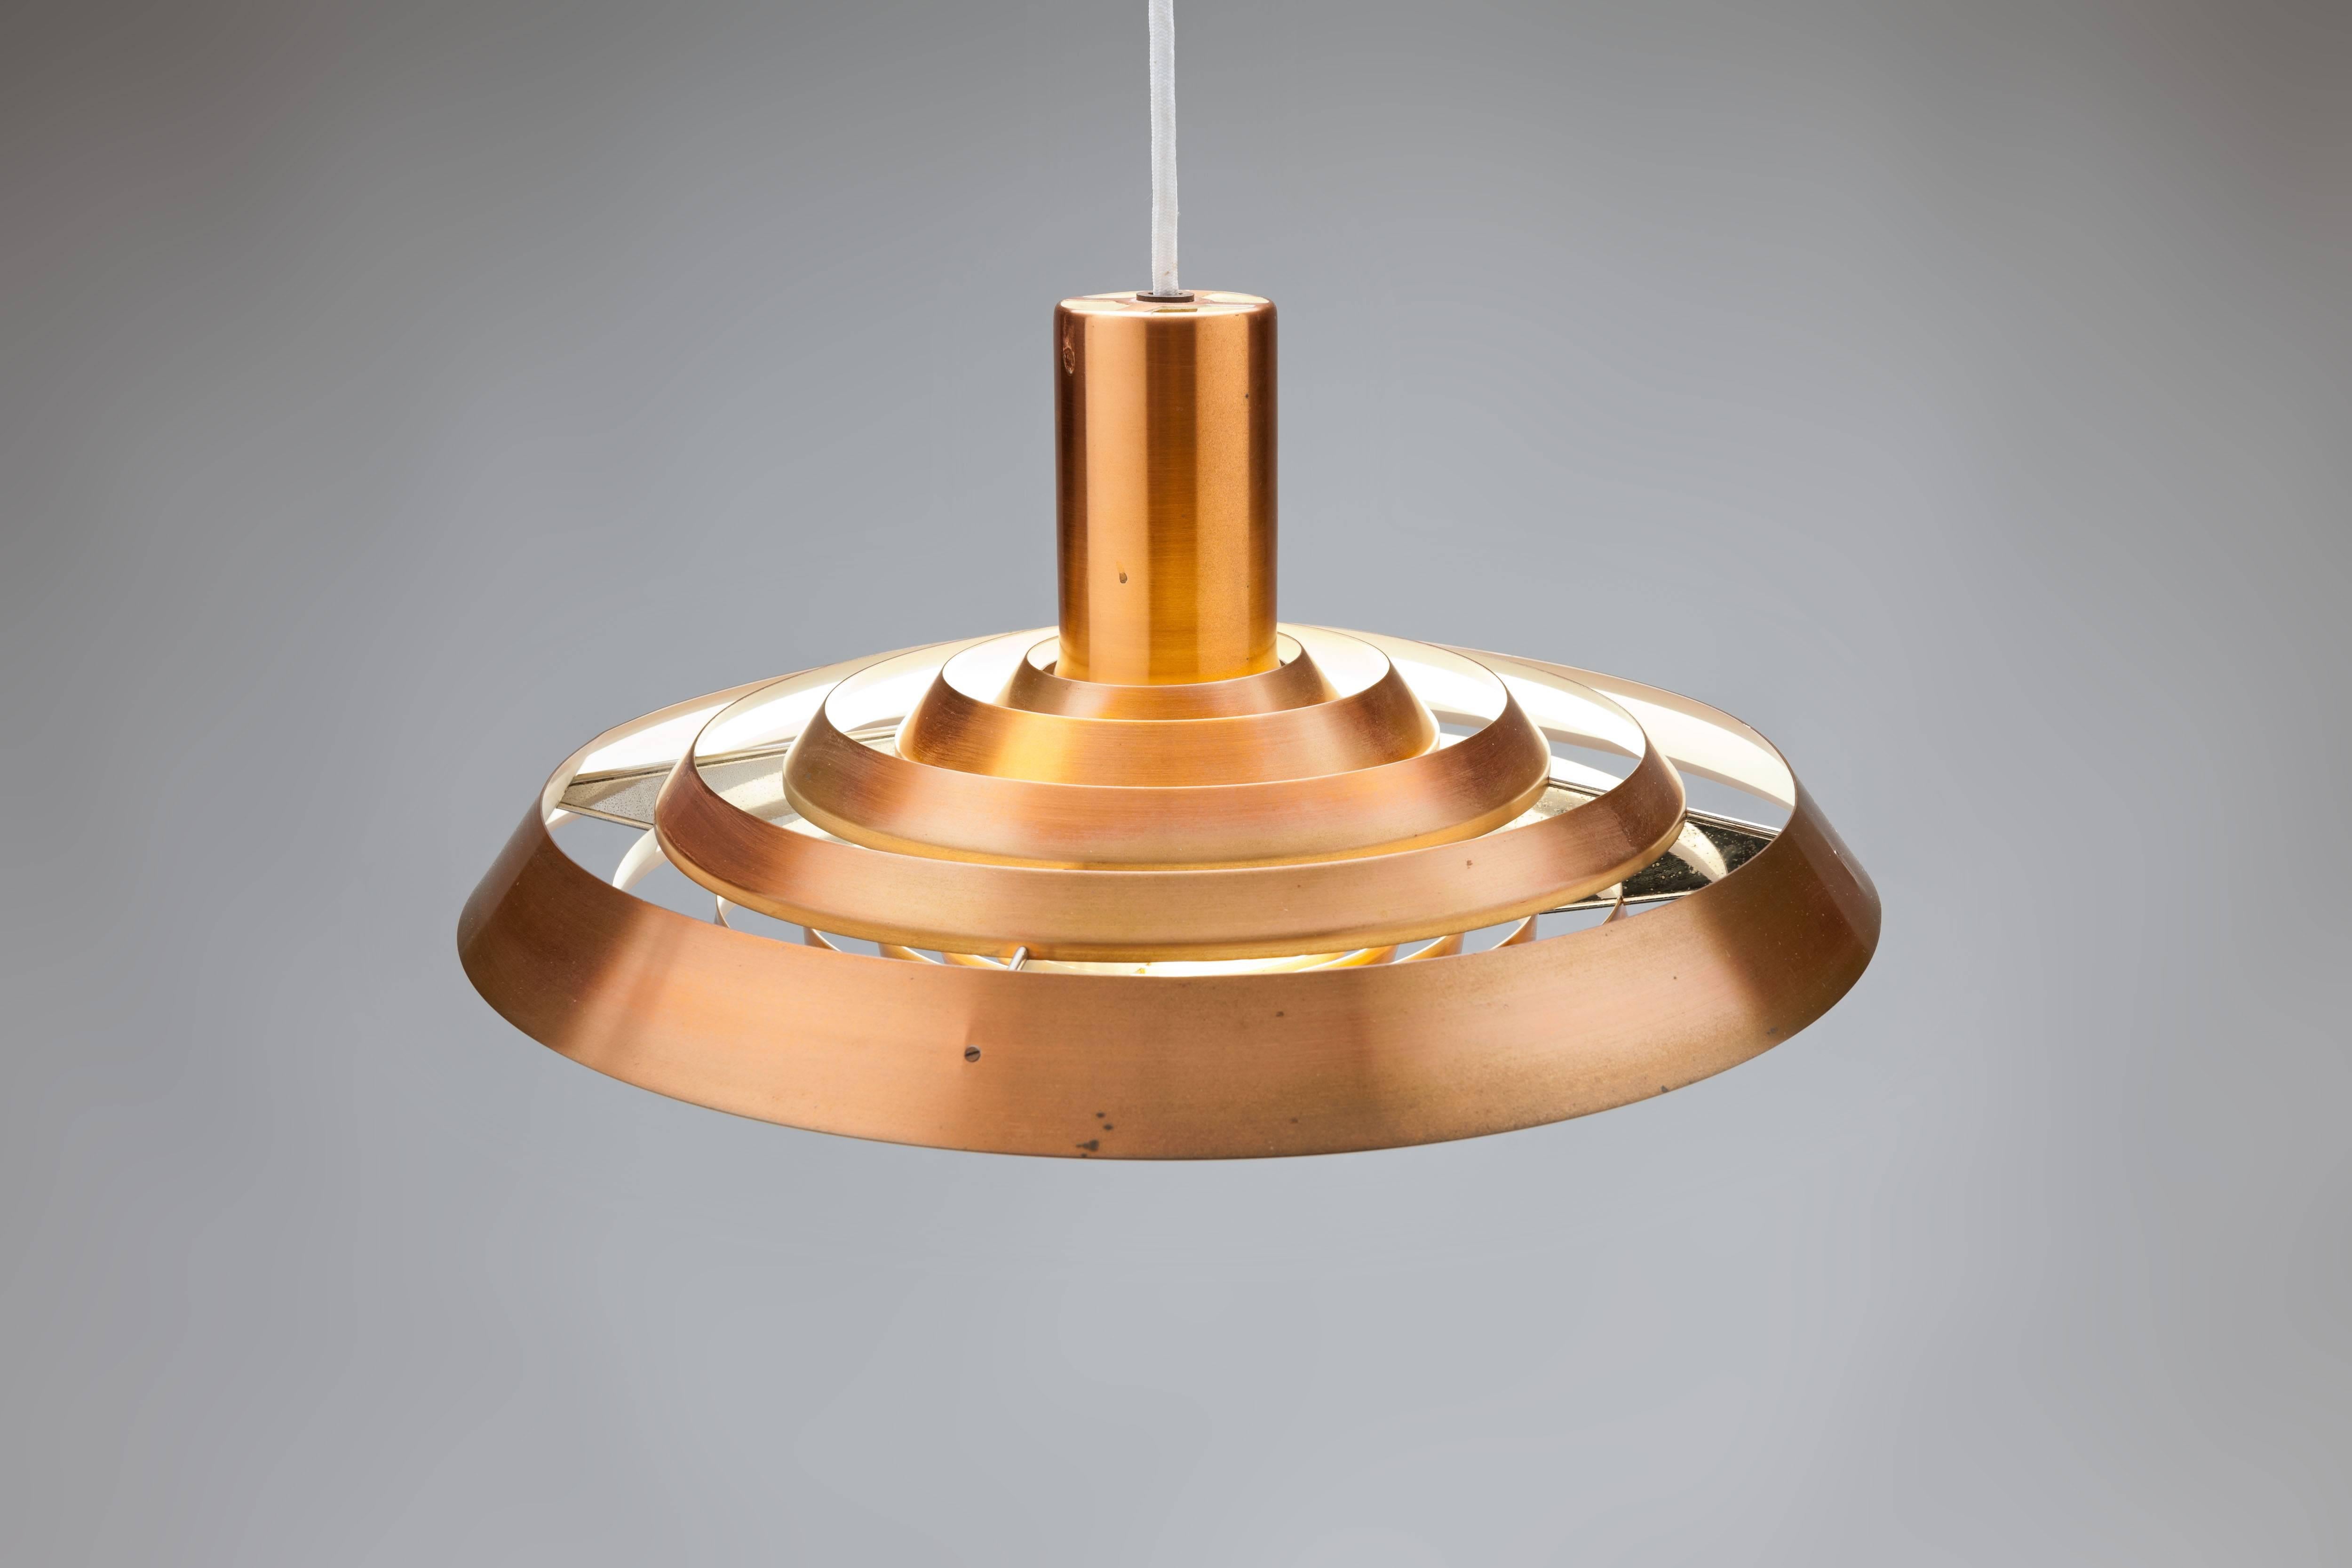 Copper Langelinie plate pendant by Poul Henningsen for Louis Poulsen originally designed in 1958 for the Langelinie Pavilion in Copenhagen and inspired by the pattern of rings in the water surrounding the Pavilion. This lamp was produced in the same